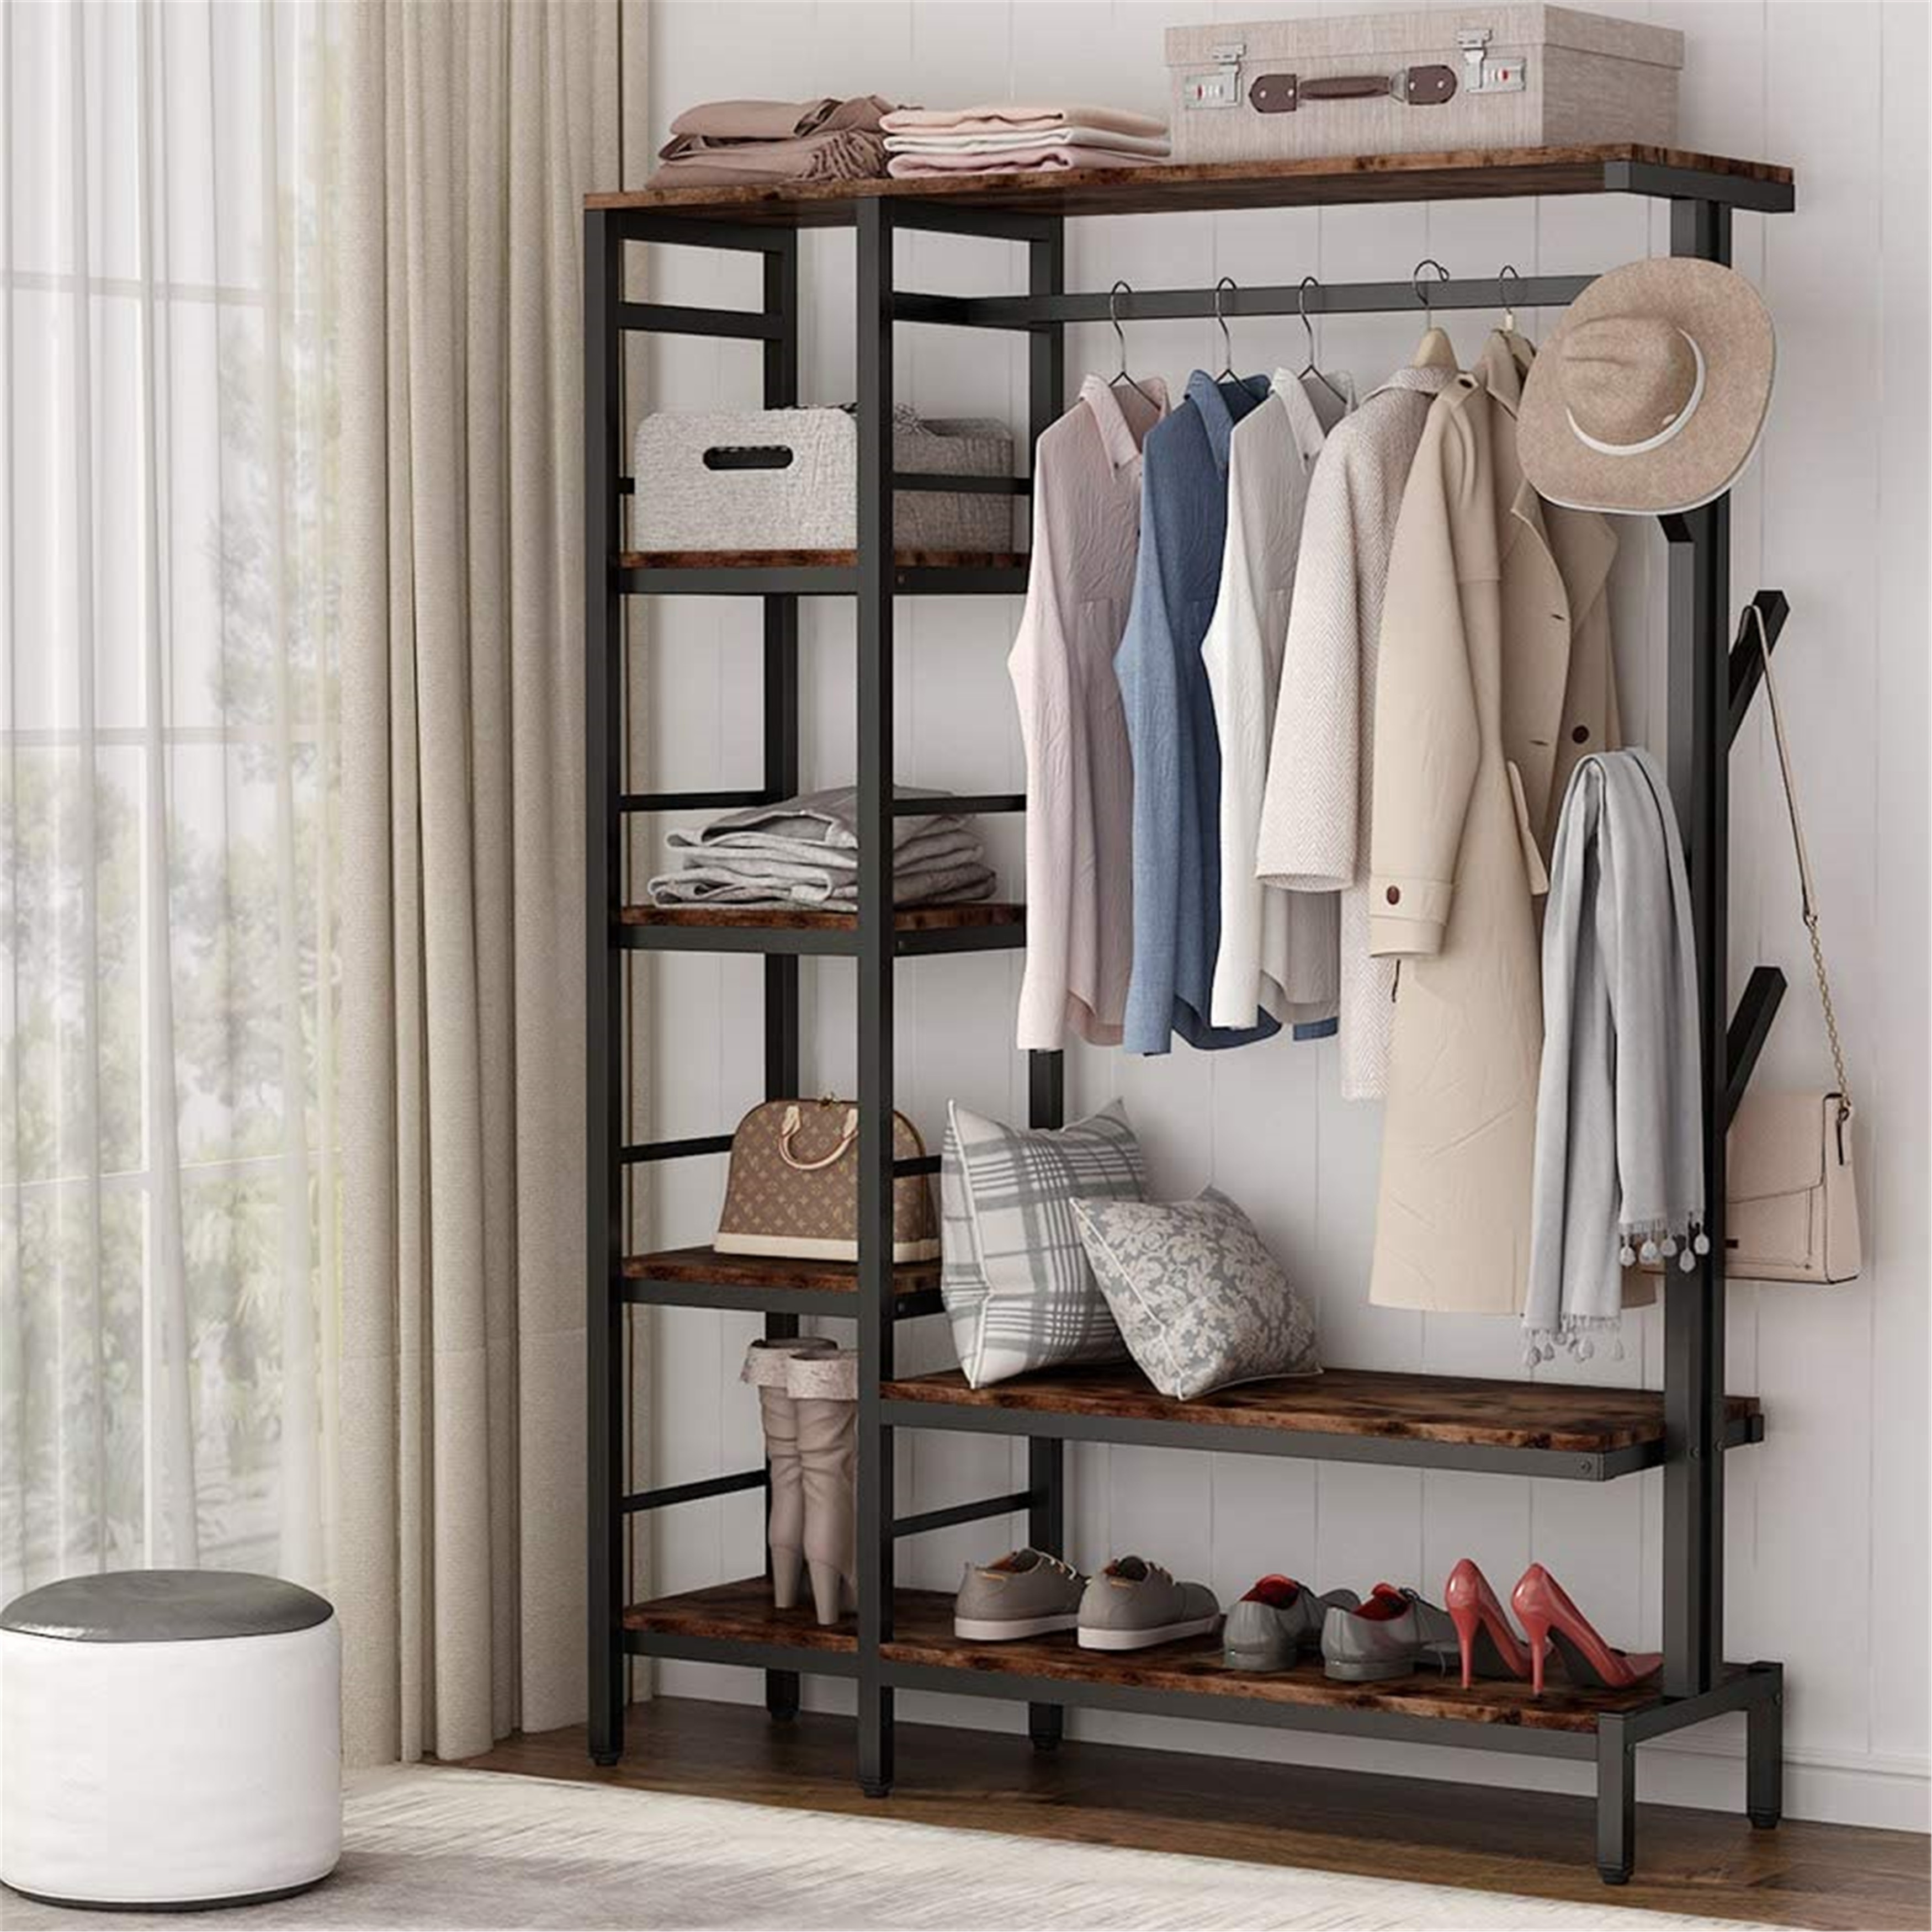 https://ak1.ostkcdn.com/images/products/is/images/direct/d32049b042fa5737f90cb88c958ca205e4042e54/Free-Standing-Closet-Organizer-with-Hooks-Garment-Rack-with-Shelves-and-Hanging-Rod.jpg